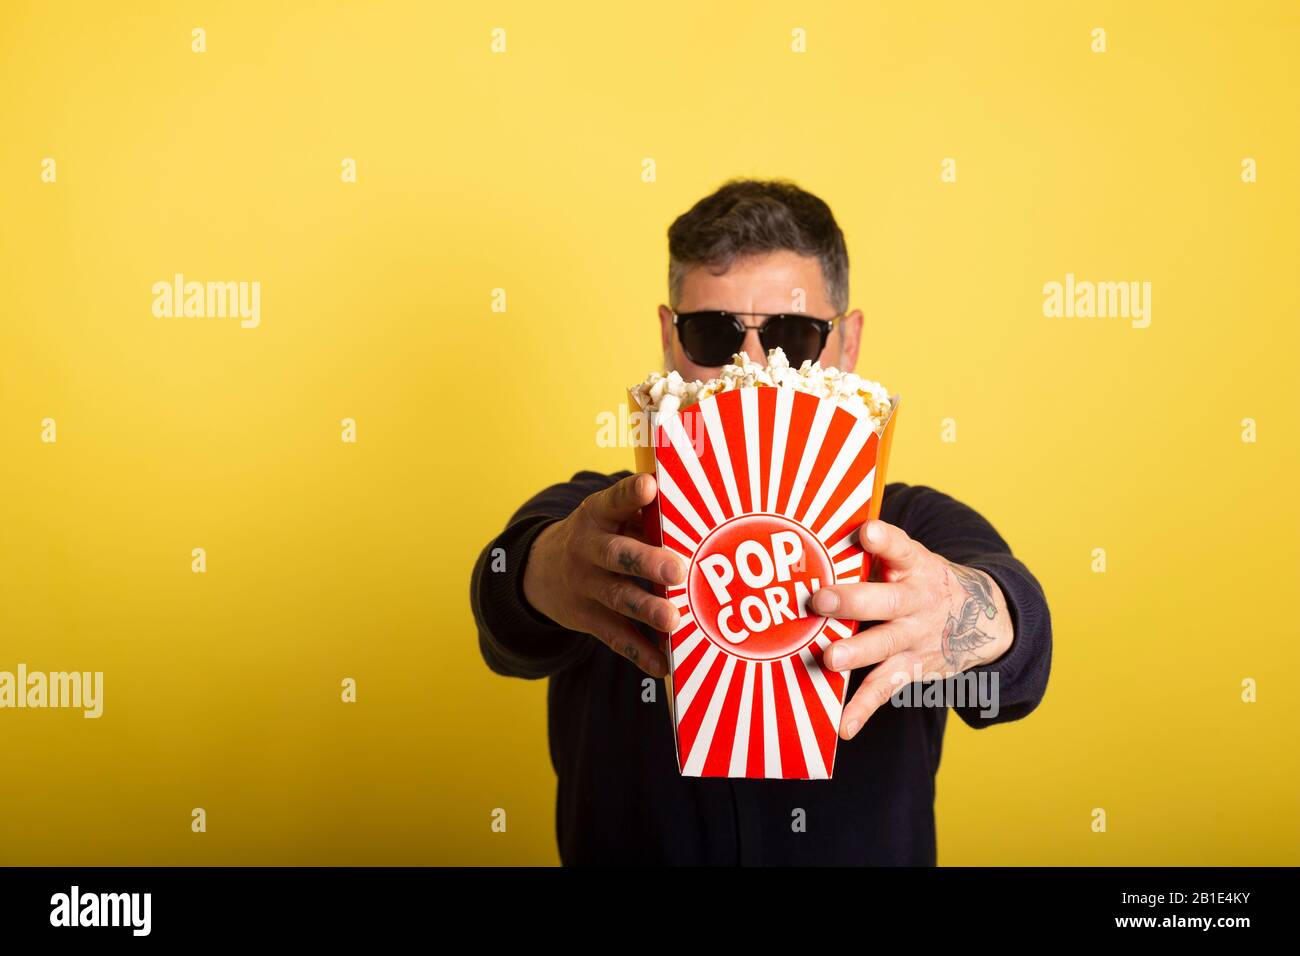 Man with defocused sunglasses showing a box full of popcorn over yellow background. Stock Photo